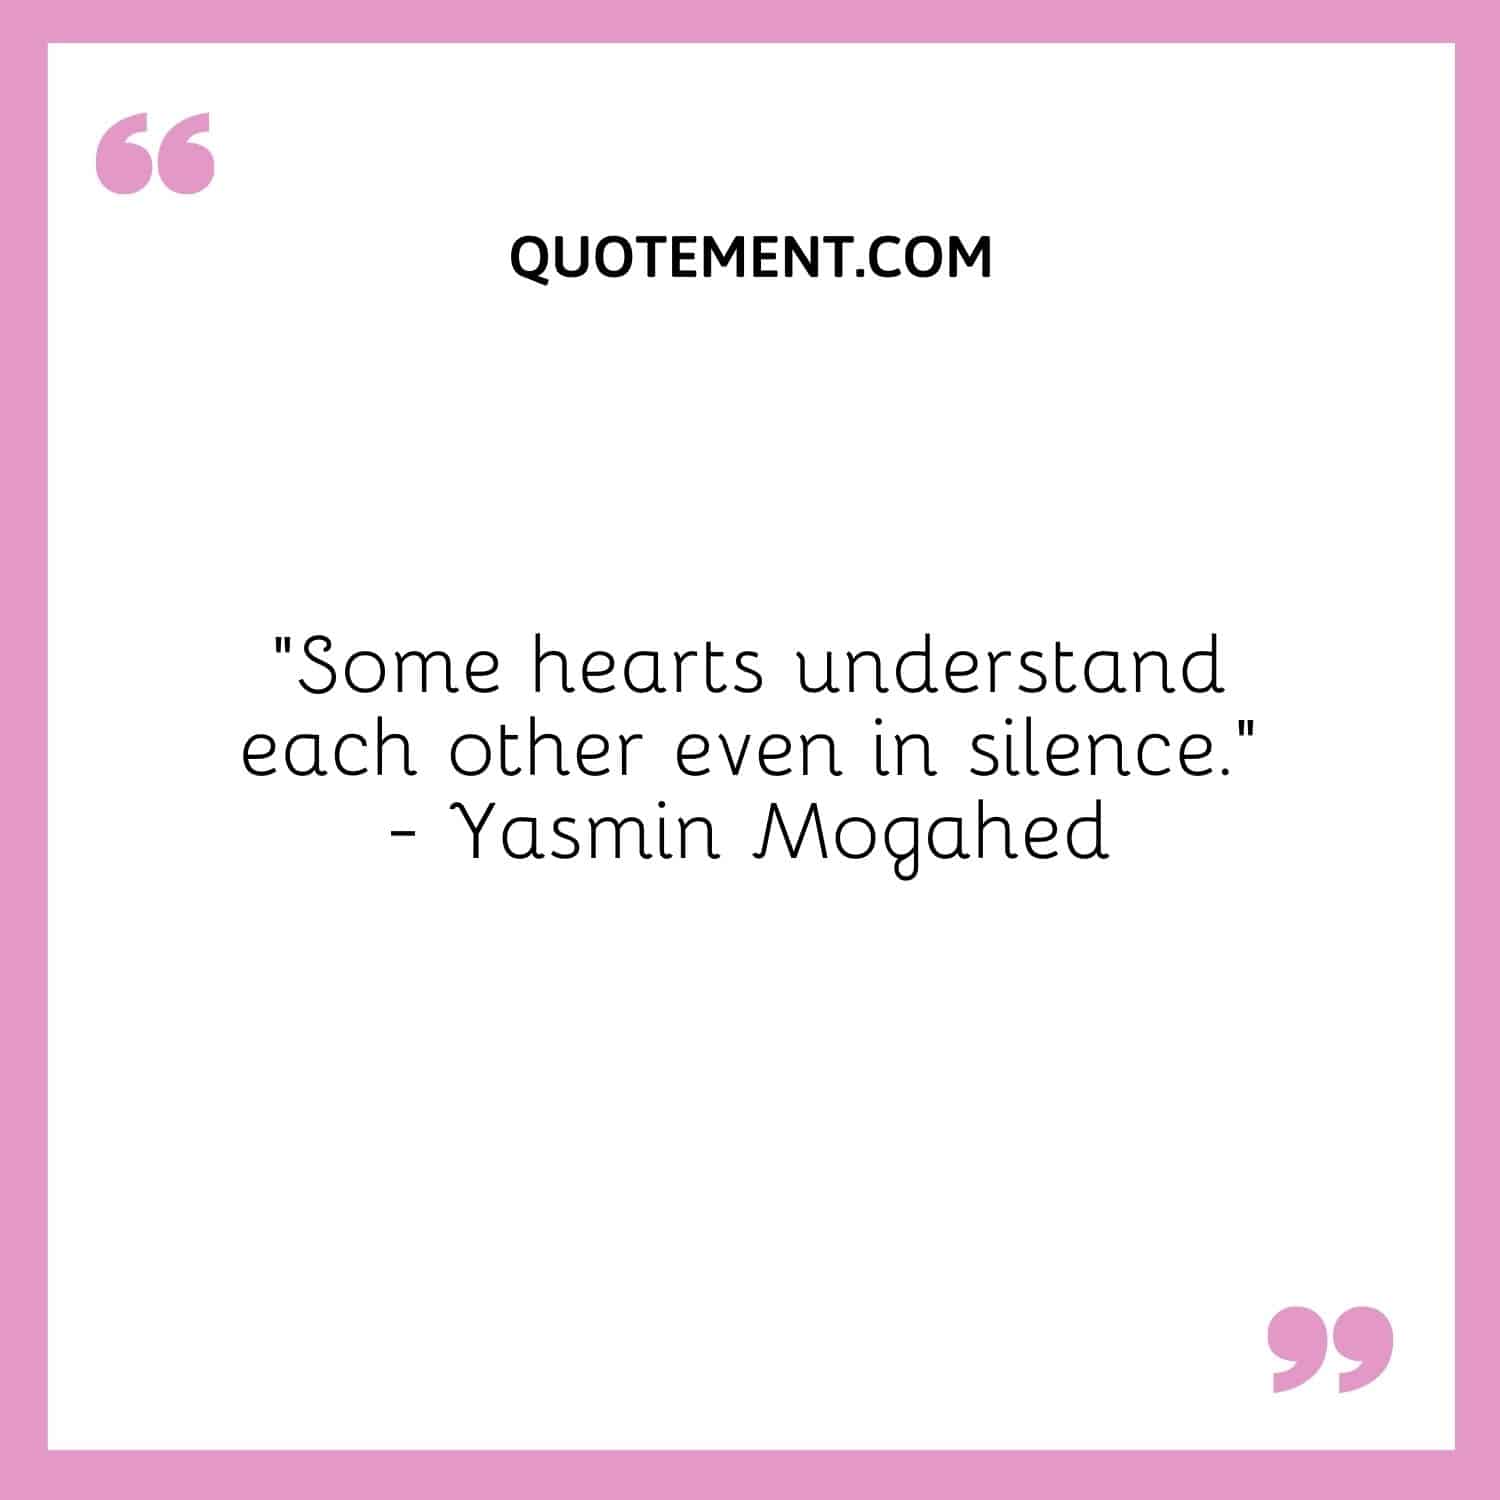 “Some hearts understand each other even in silence.” — Yasmin Mogahed